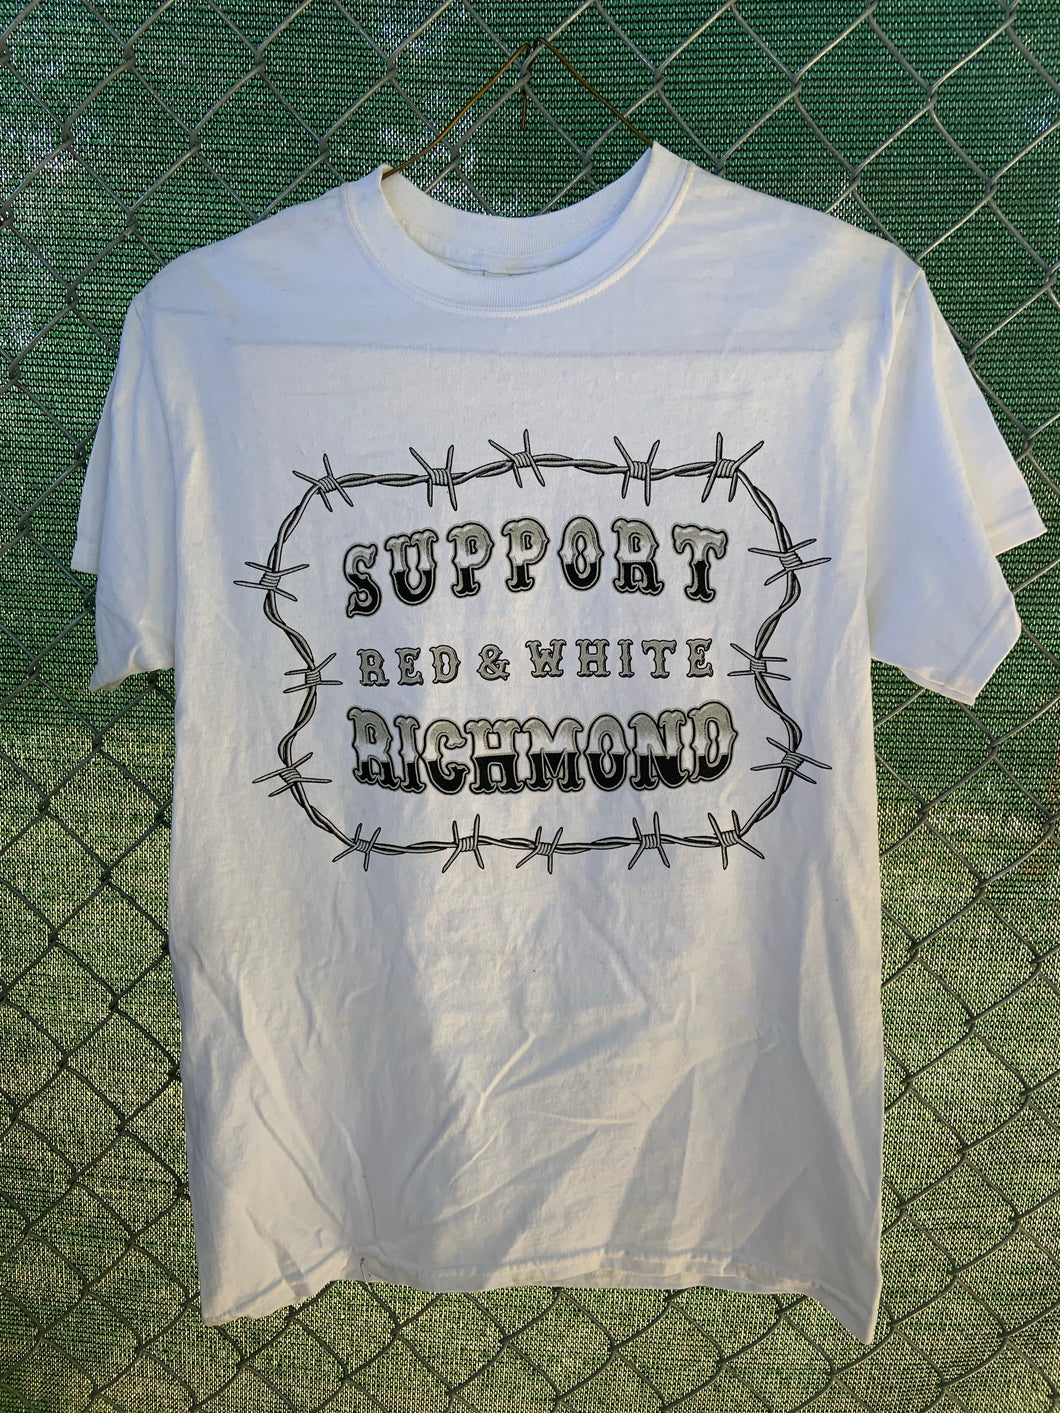 White shirt with black barbed wire